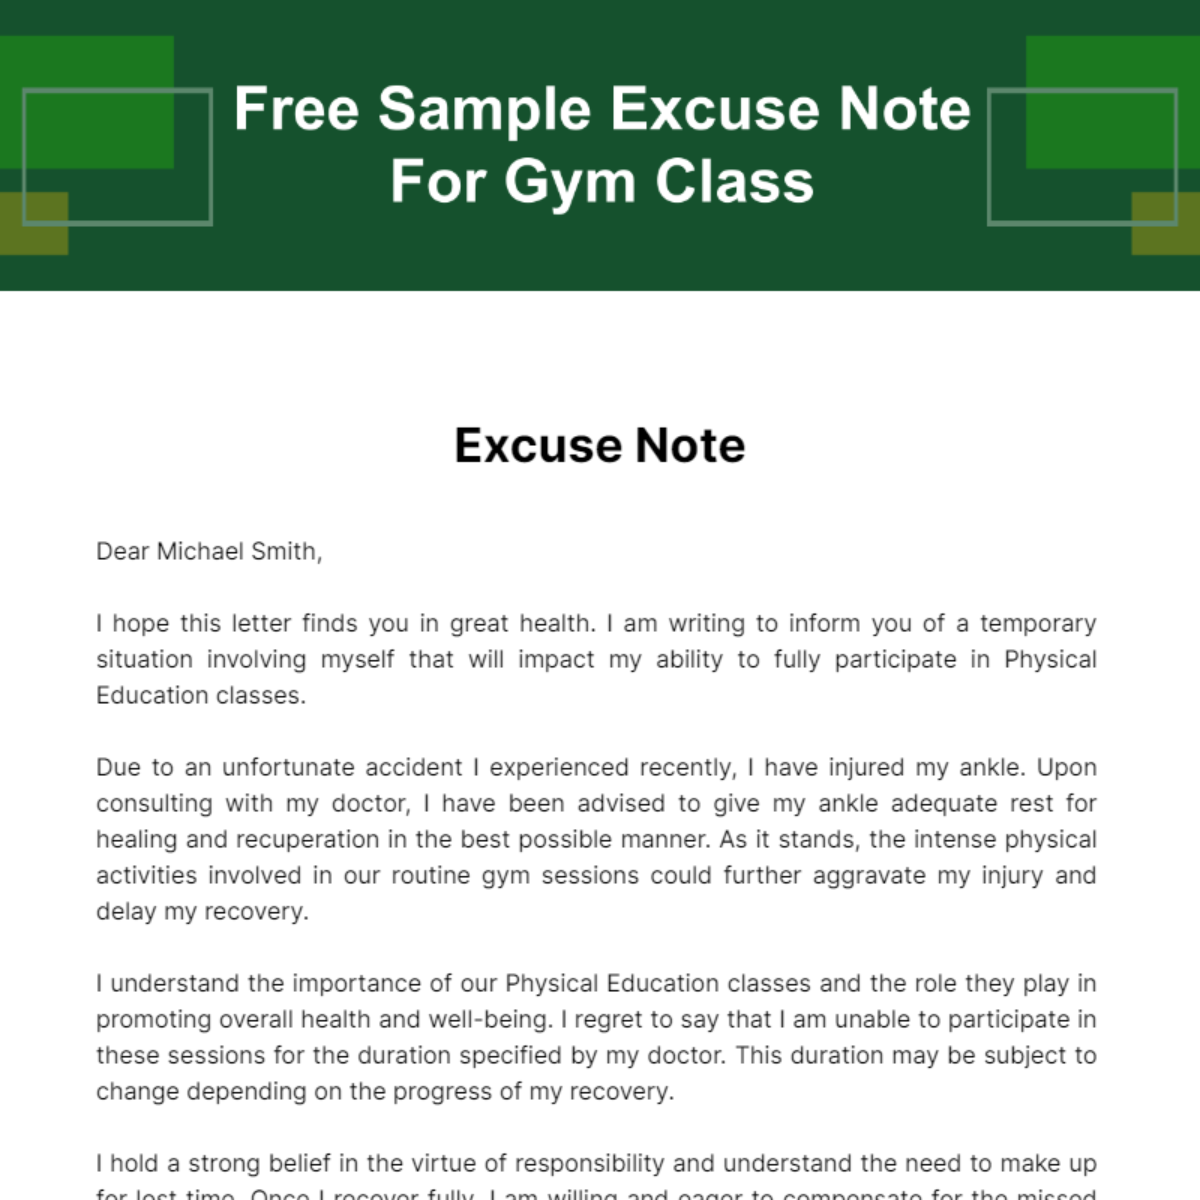 Sample Excuse Note For Gym Class Template